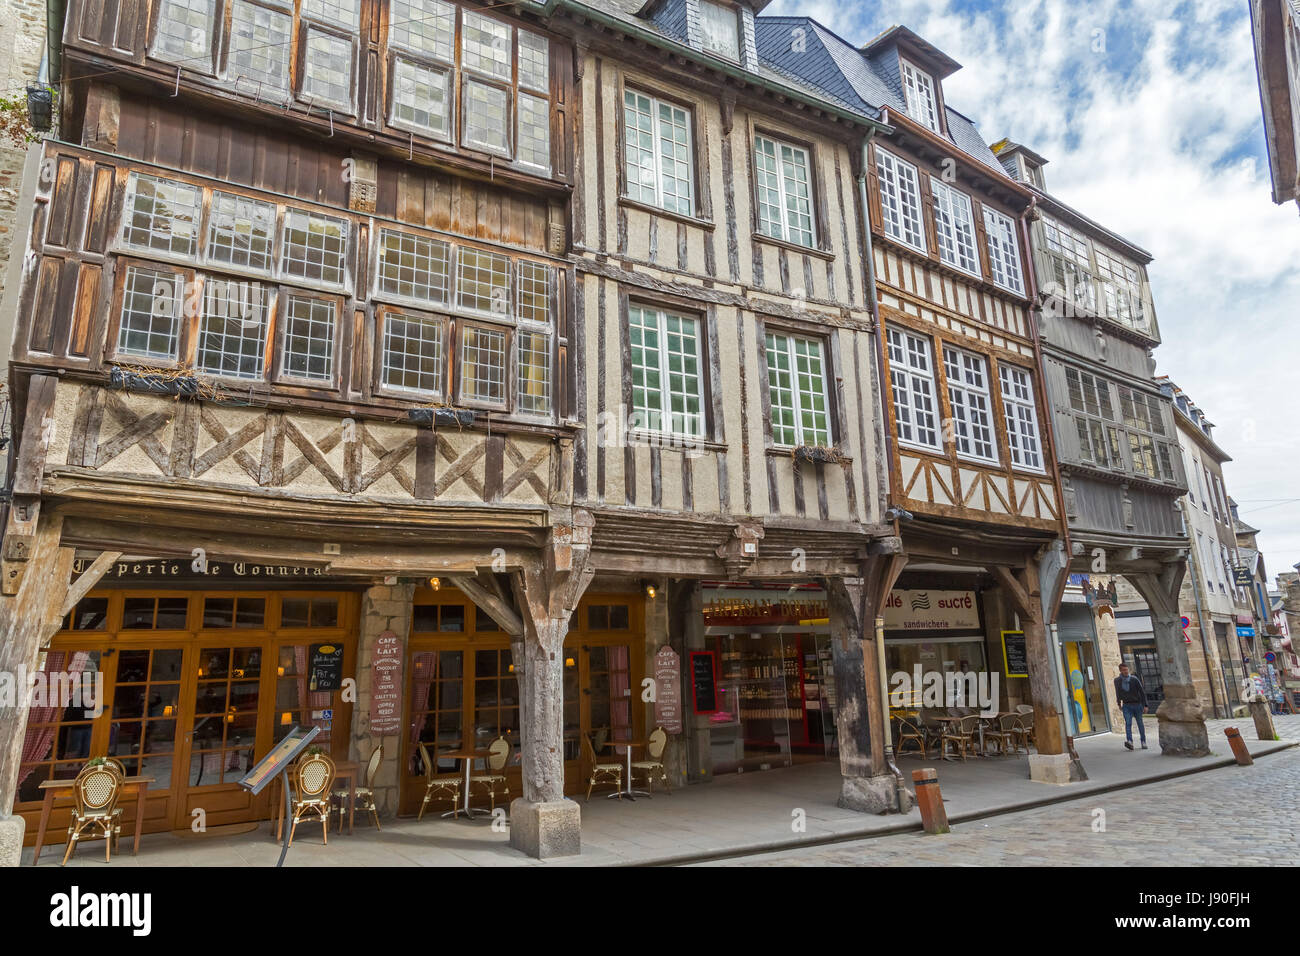 The medieval town of Dinan, France. Stock Photo